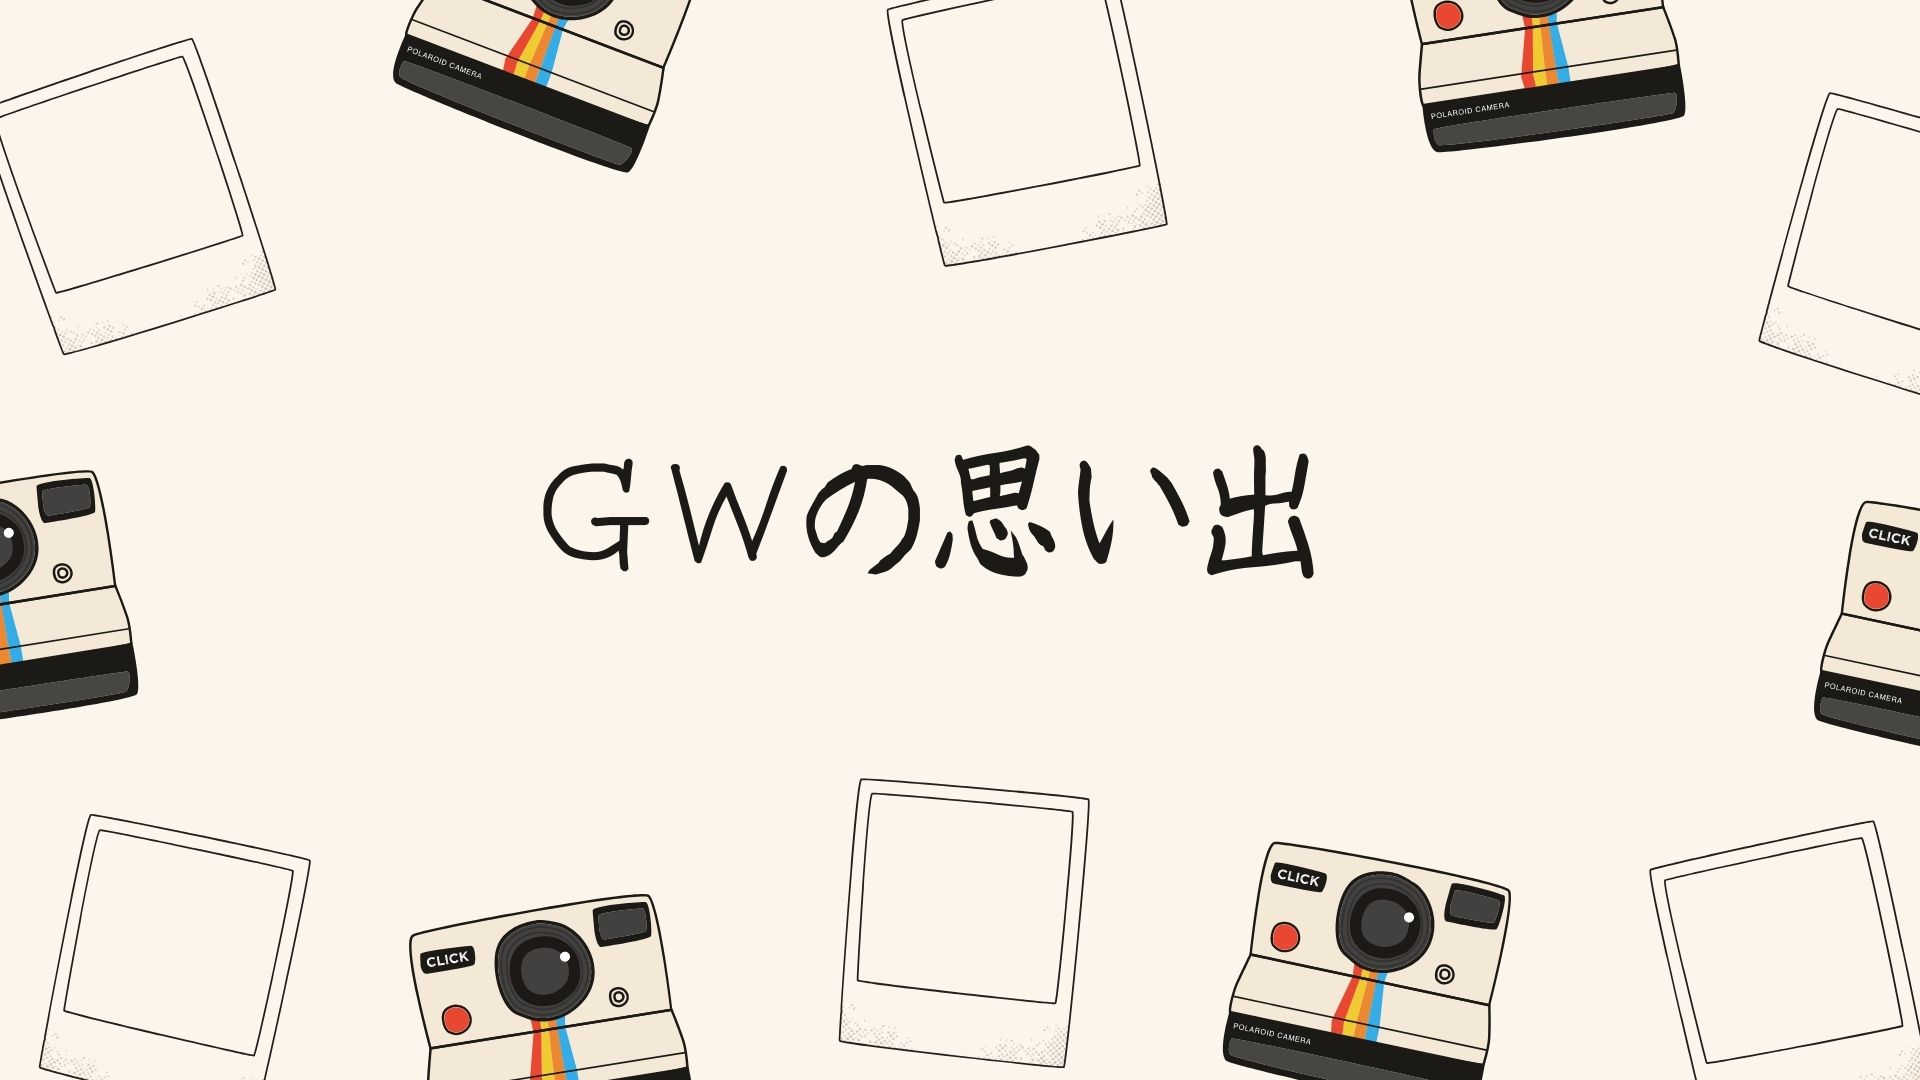 You are currently viewing ＧＷの思い出